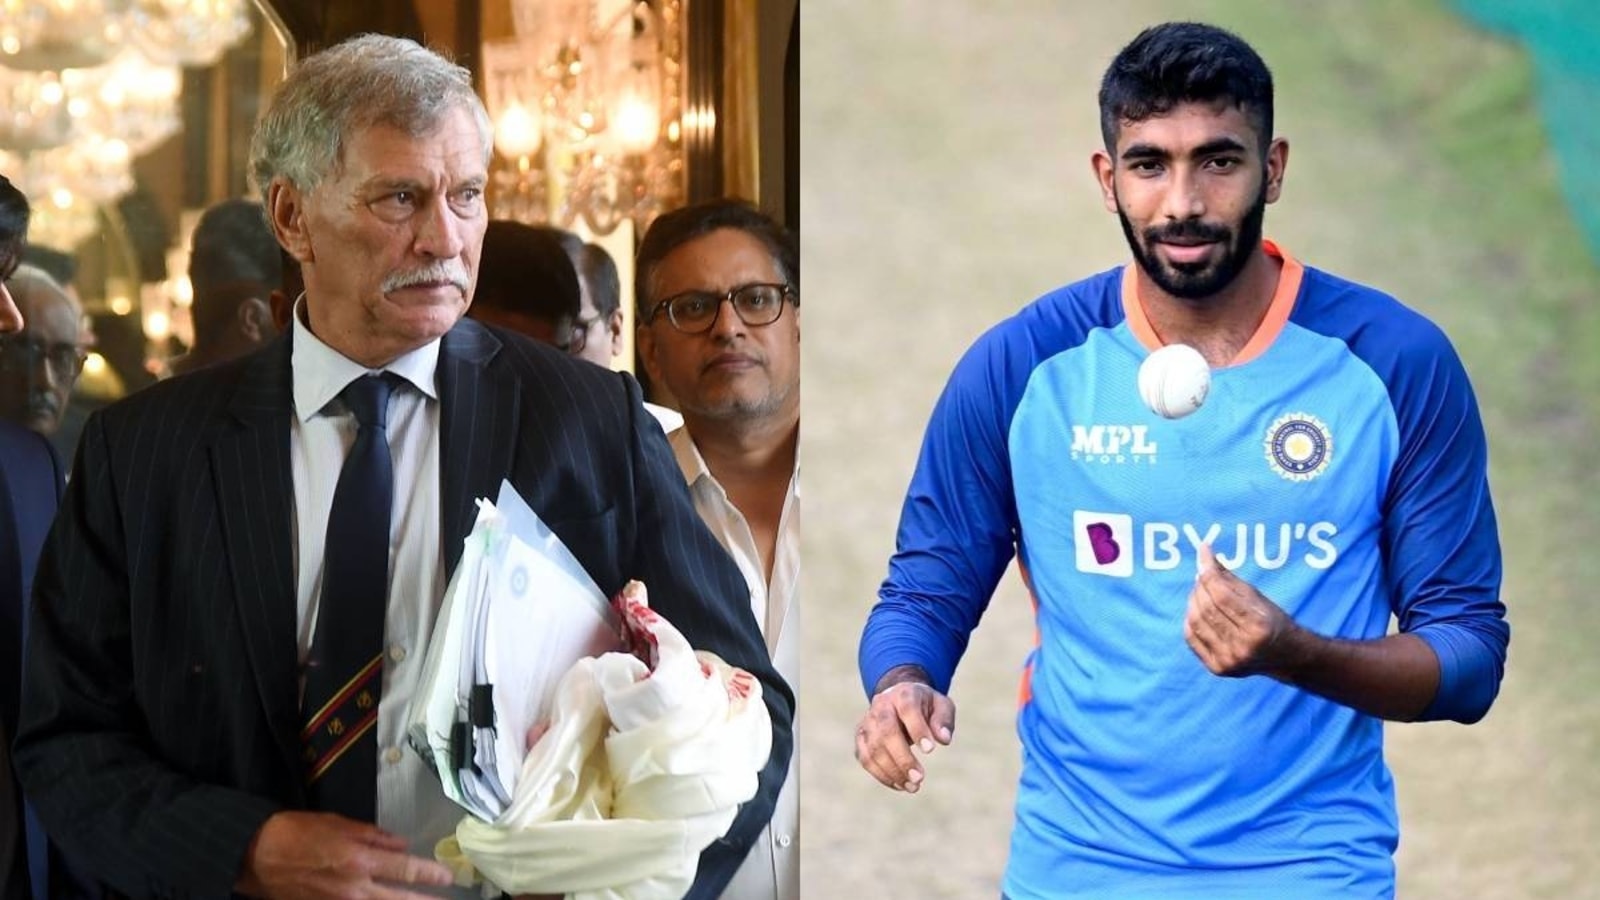 bumrah-injury-just-before-the-world-cup-new-bcci-president-roger-binny-reveals-2-things-he-wants-to-focus-on